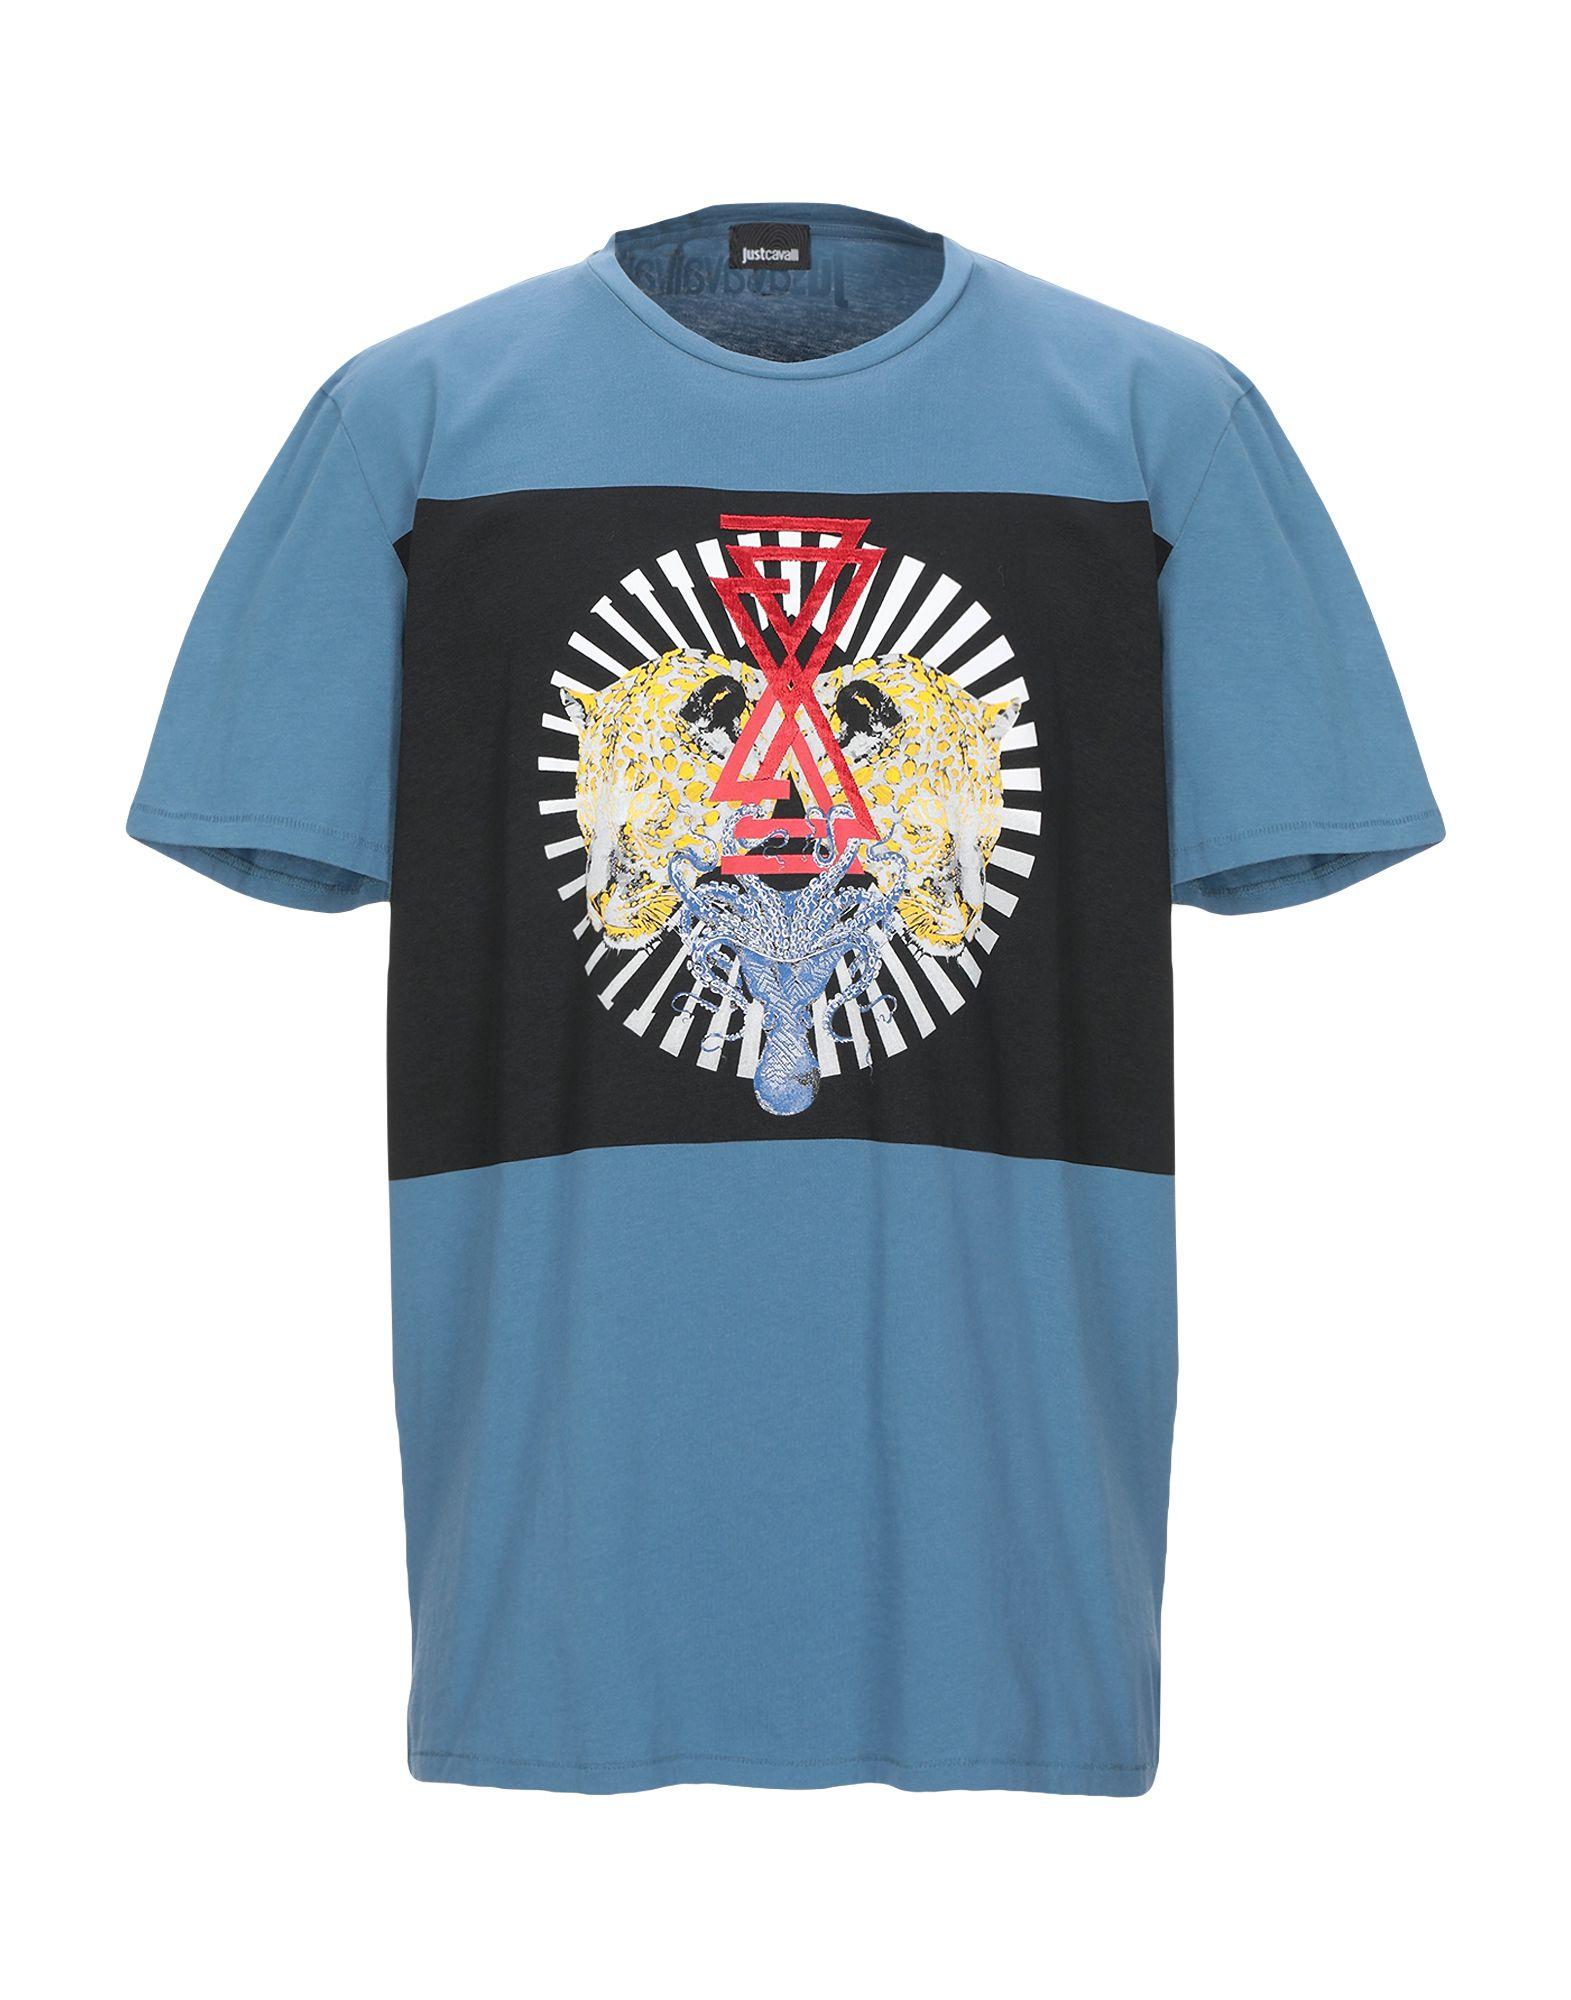 Just Cavalli Cotton T-shirt in Slate Blue (Blue) for Men - Lyst